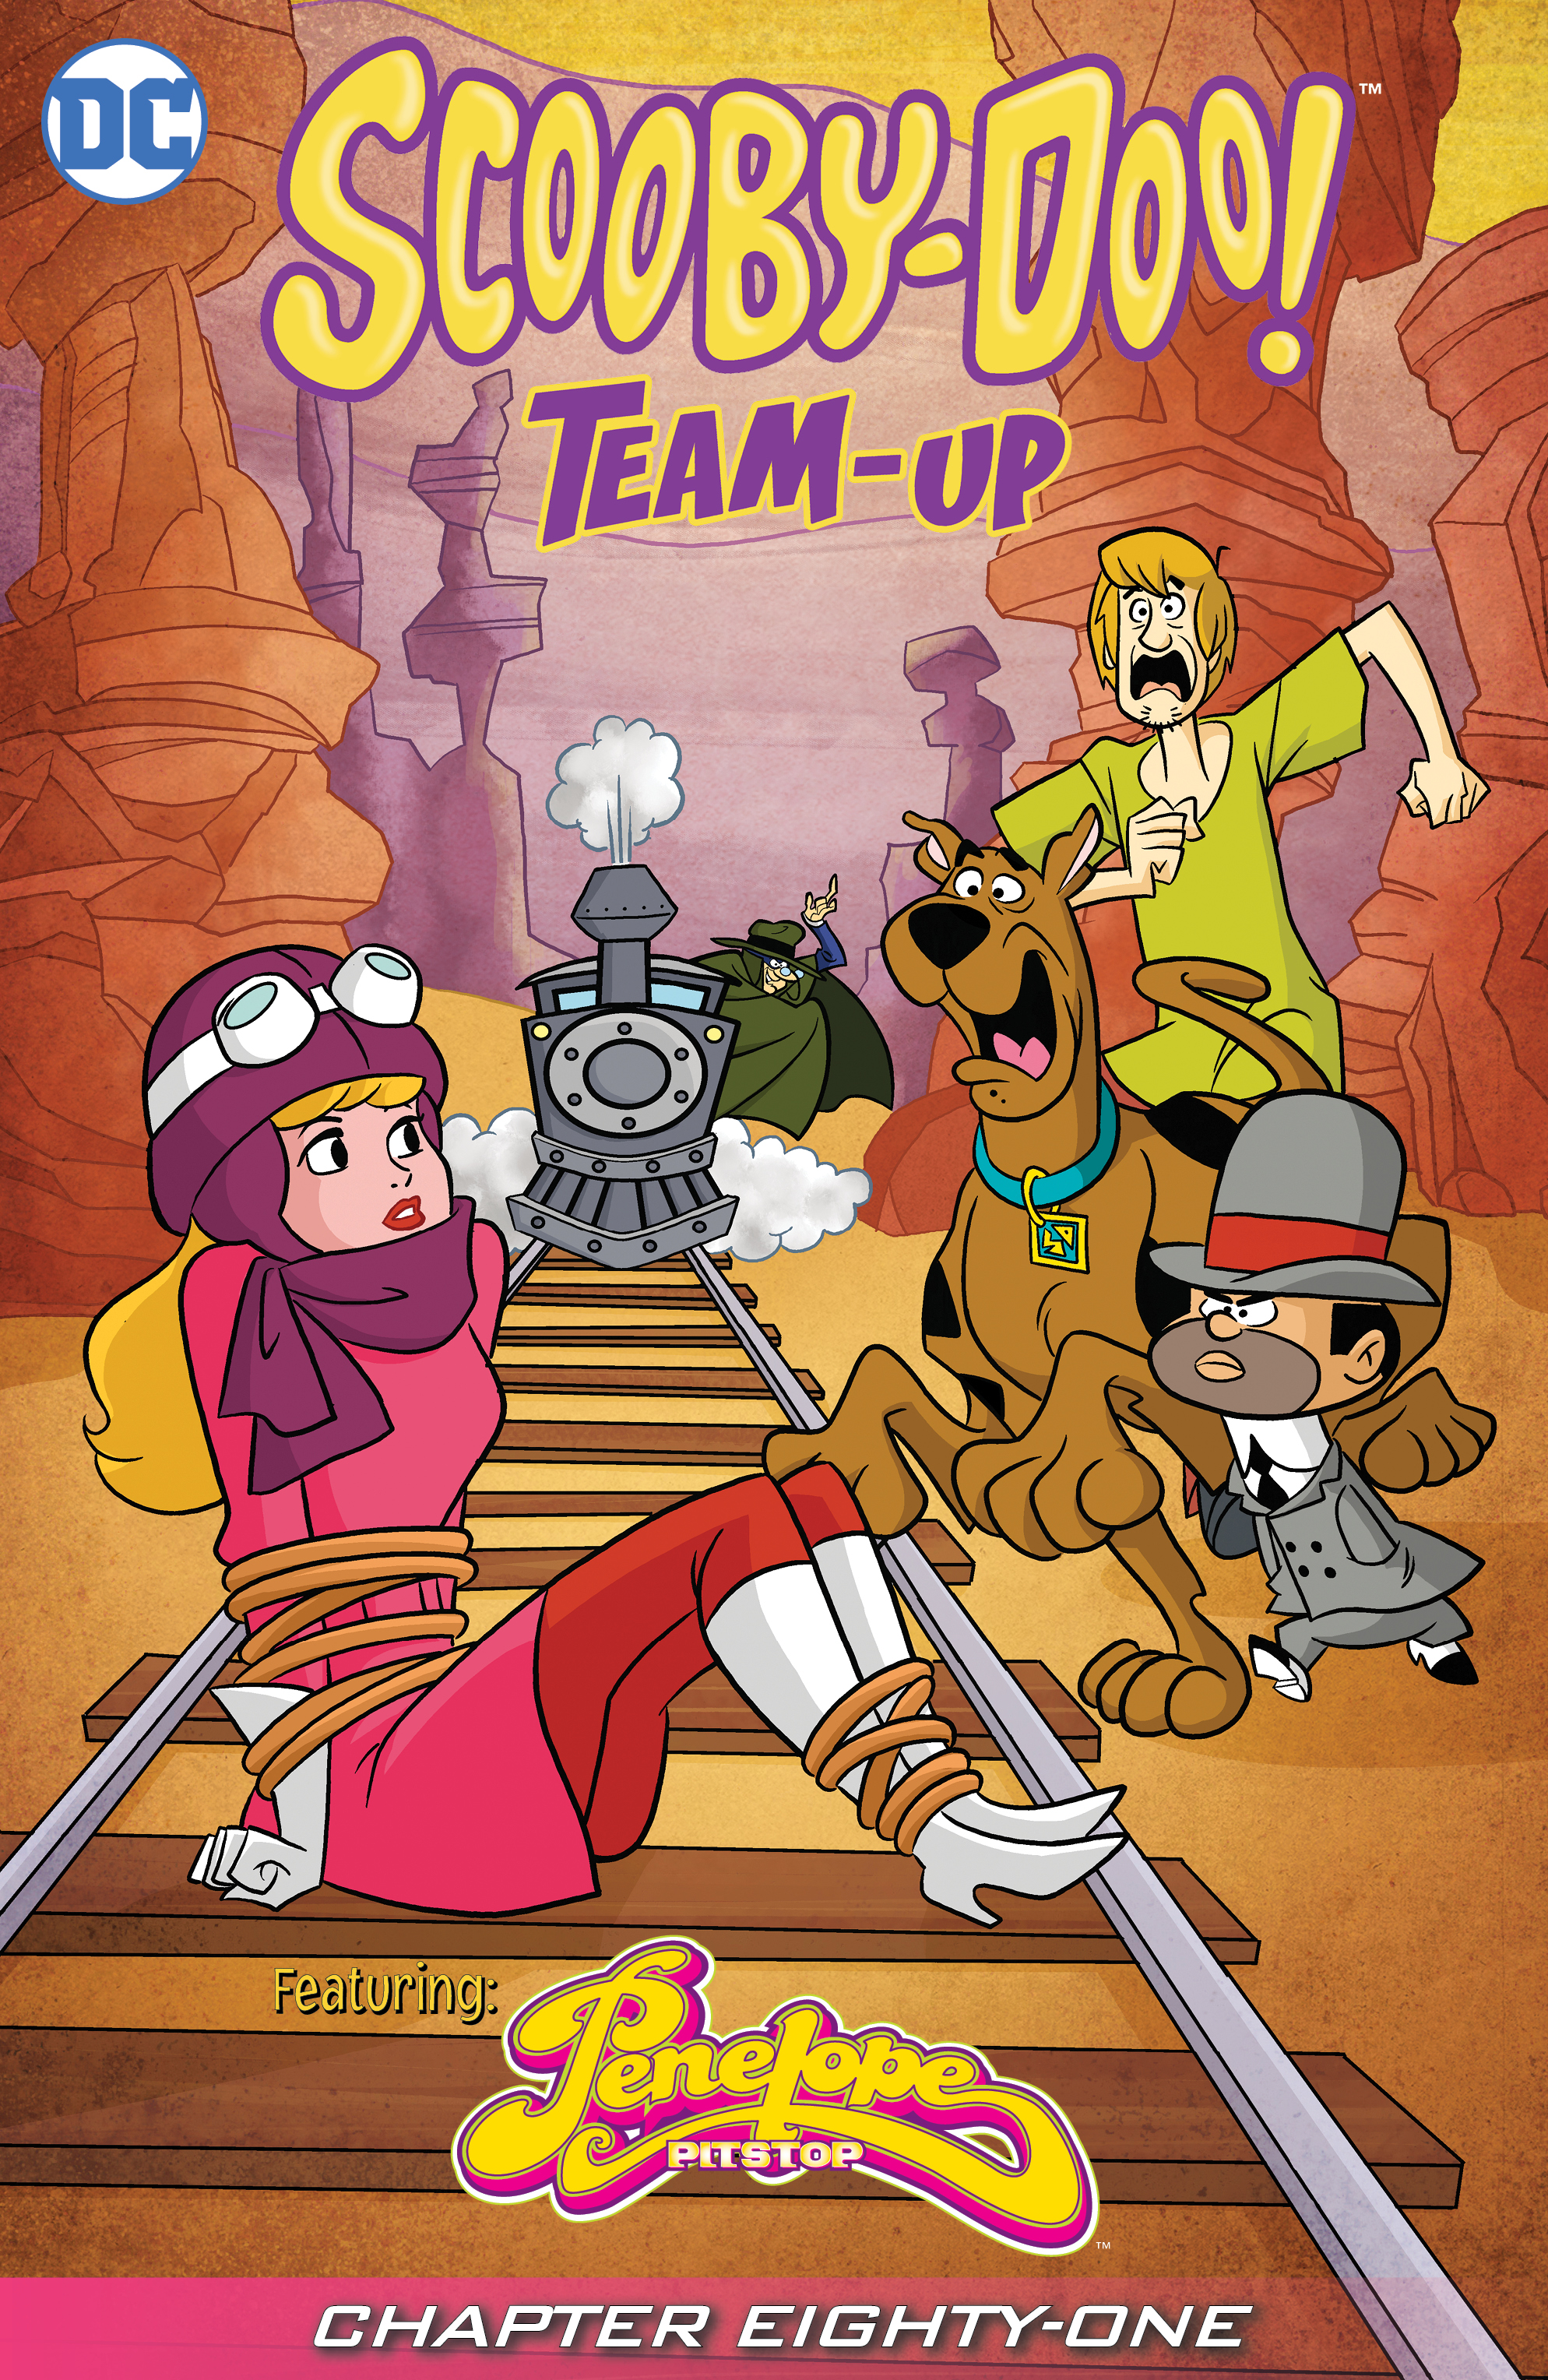 Scooby-Doo Team-Up #81 preview images